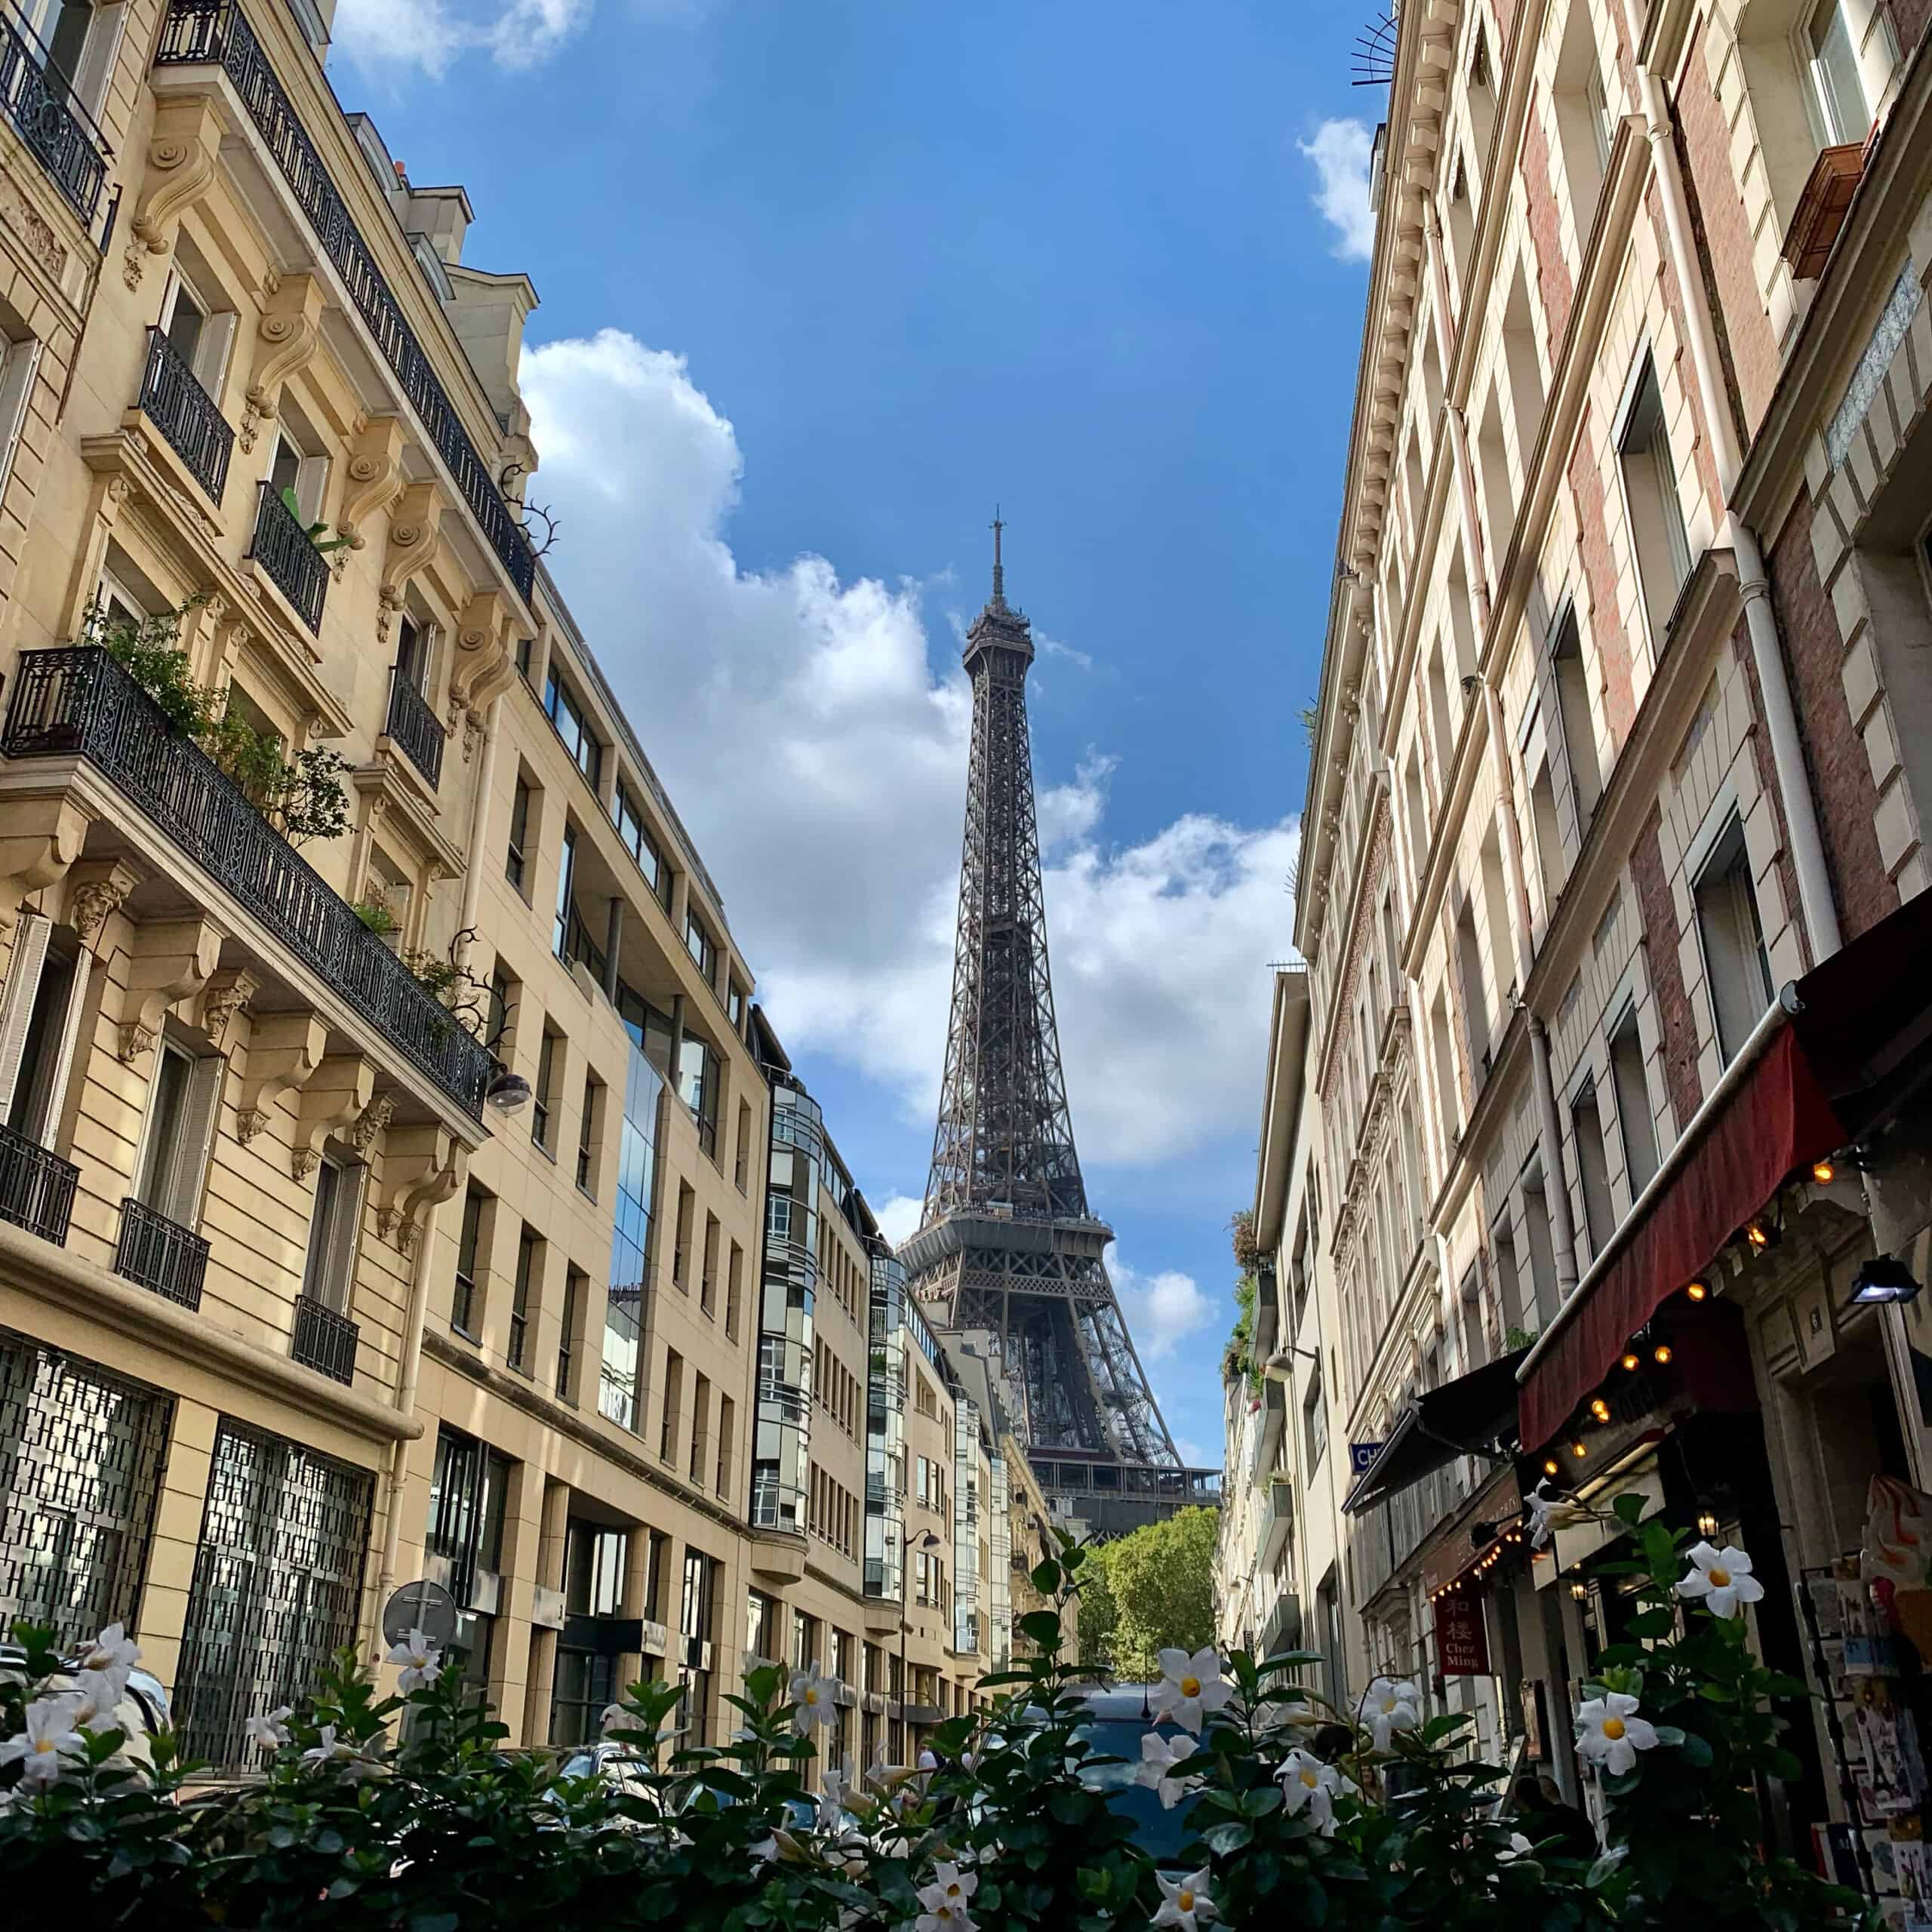 Visiting Paris, France is a once-in-a-lifetime opportunity for many people! Here are 15 things to do in Paris, with travel tips, to help you get the most out of your vacation!